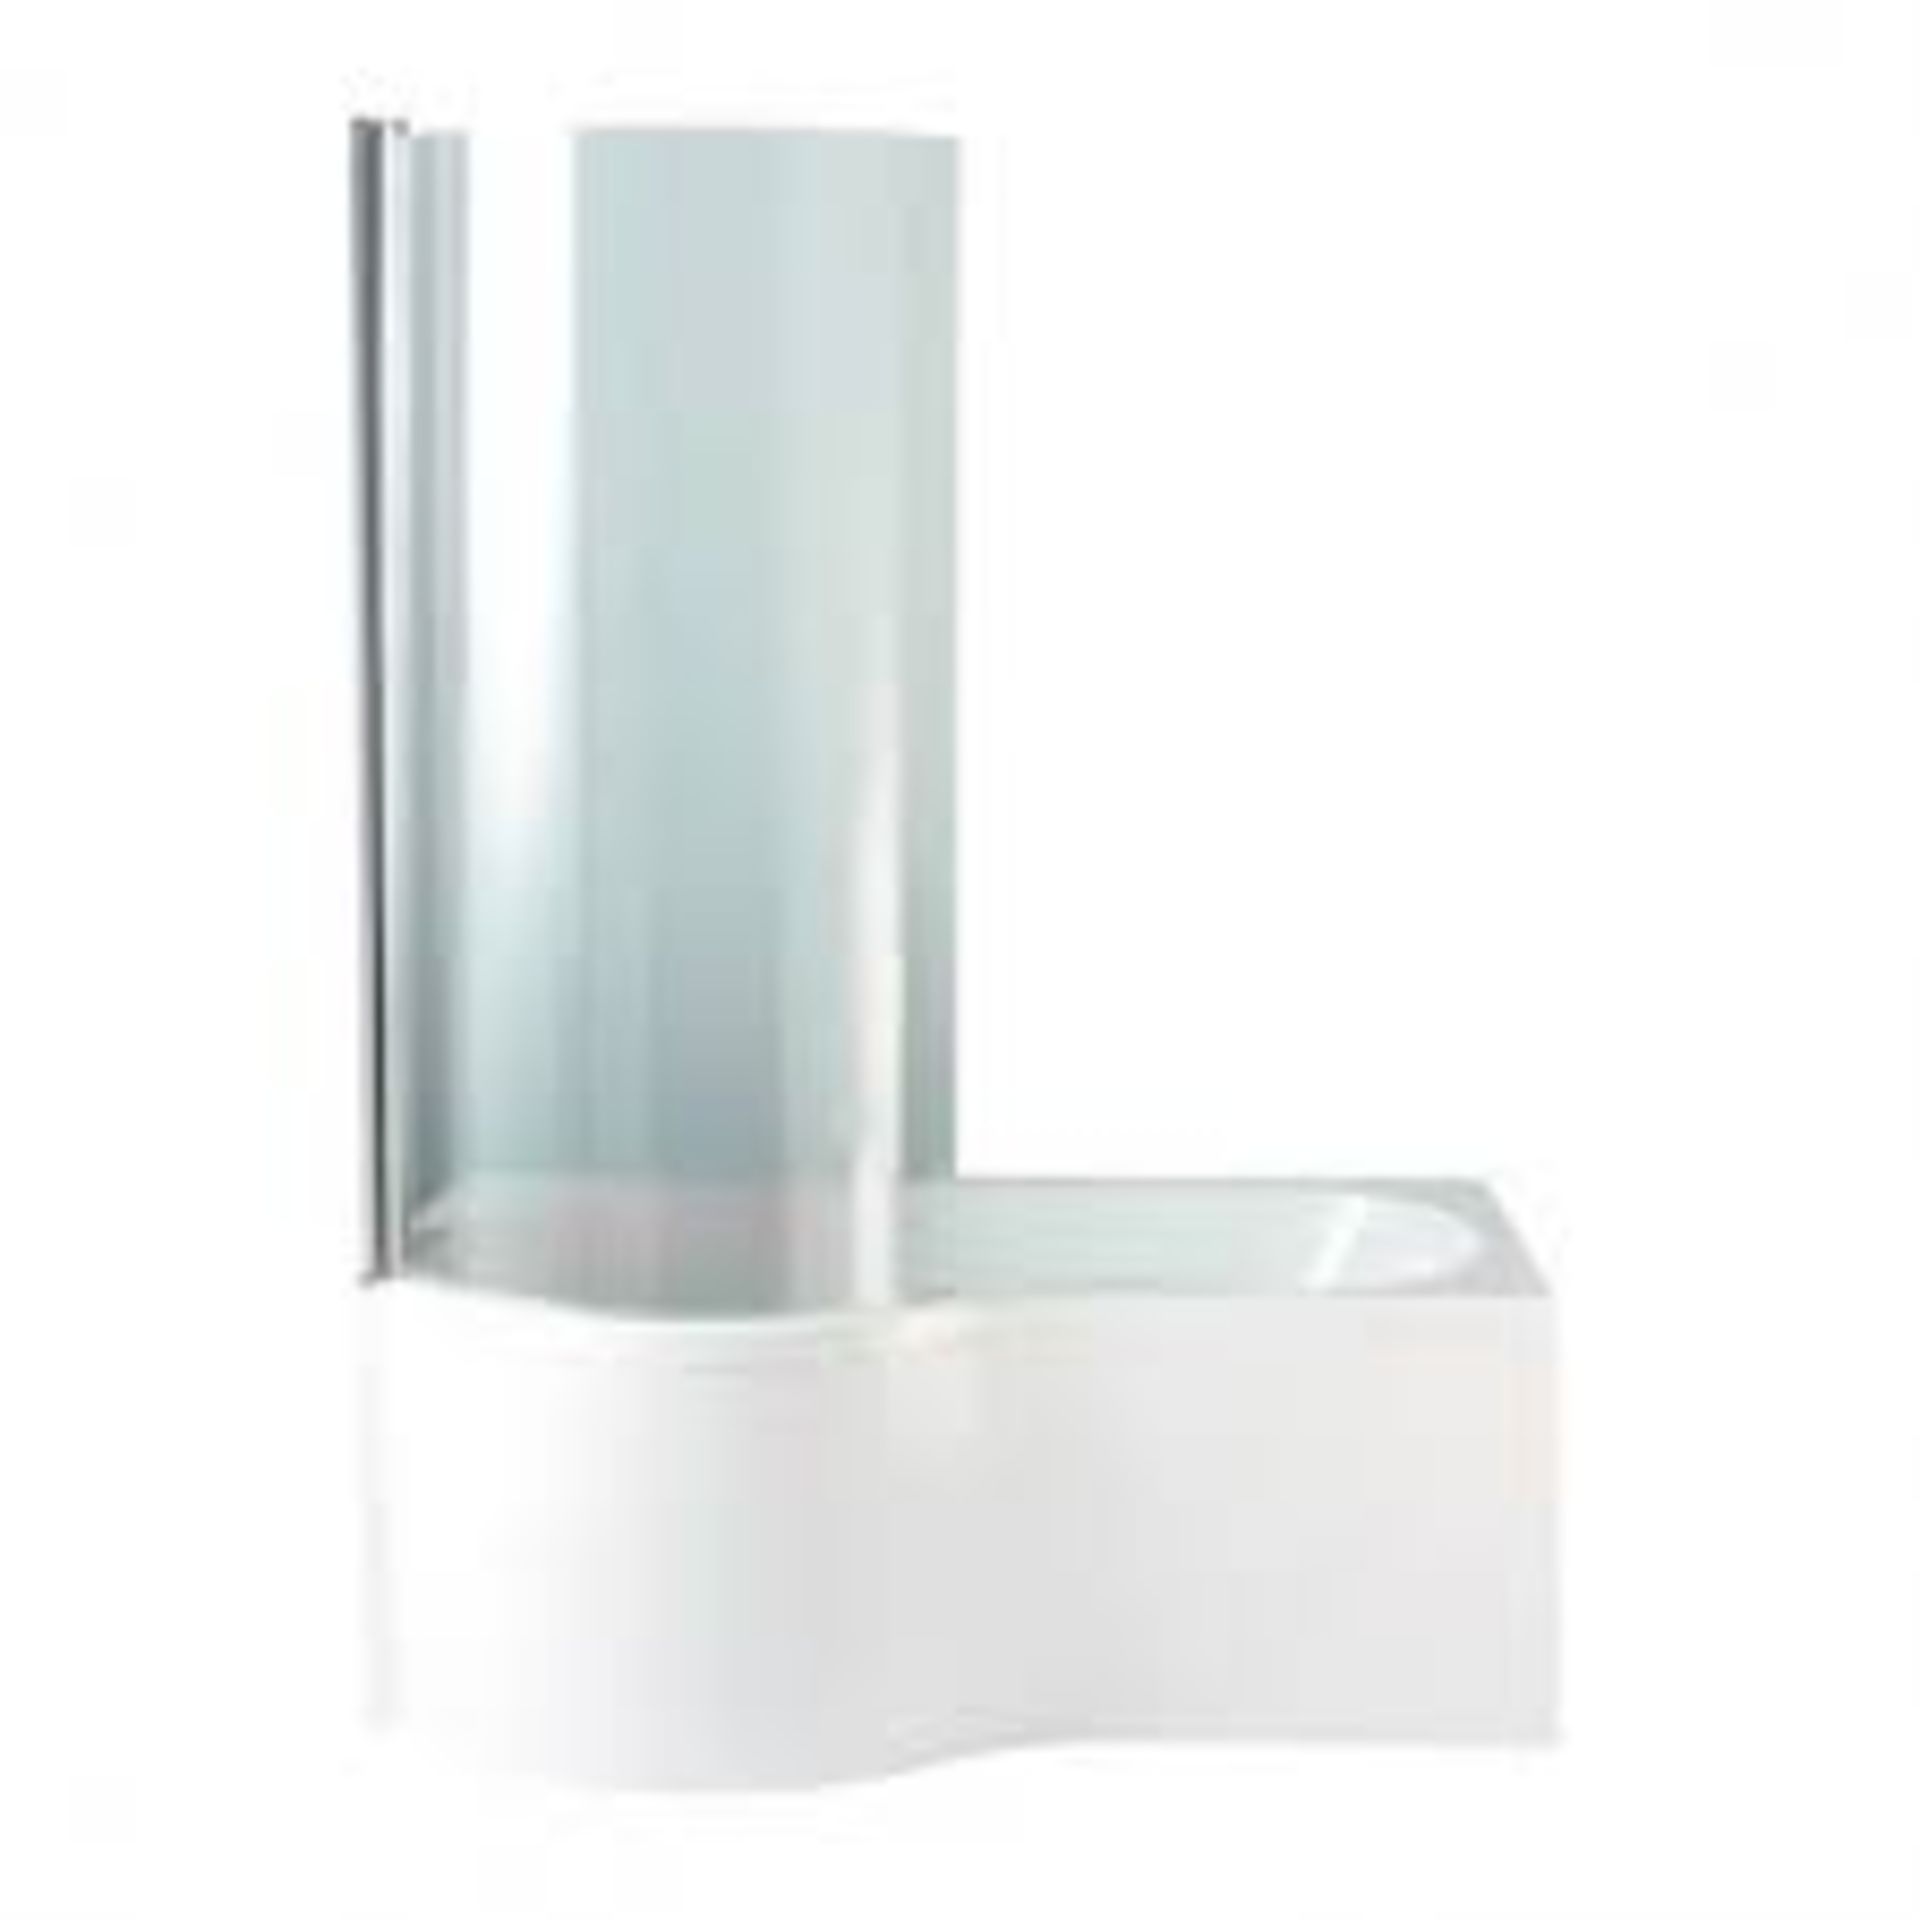 Heritage Unity SBCPL01 Chrome Left Hand Currved Bathscreen. 1565 x 840 x 250 mm. New and boxed.